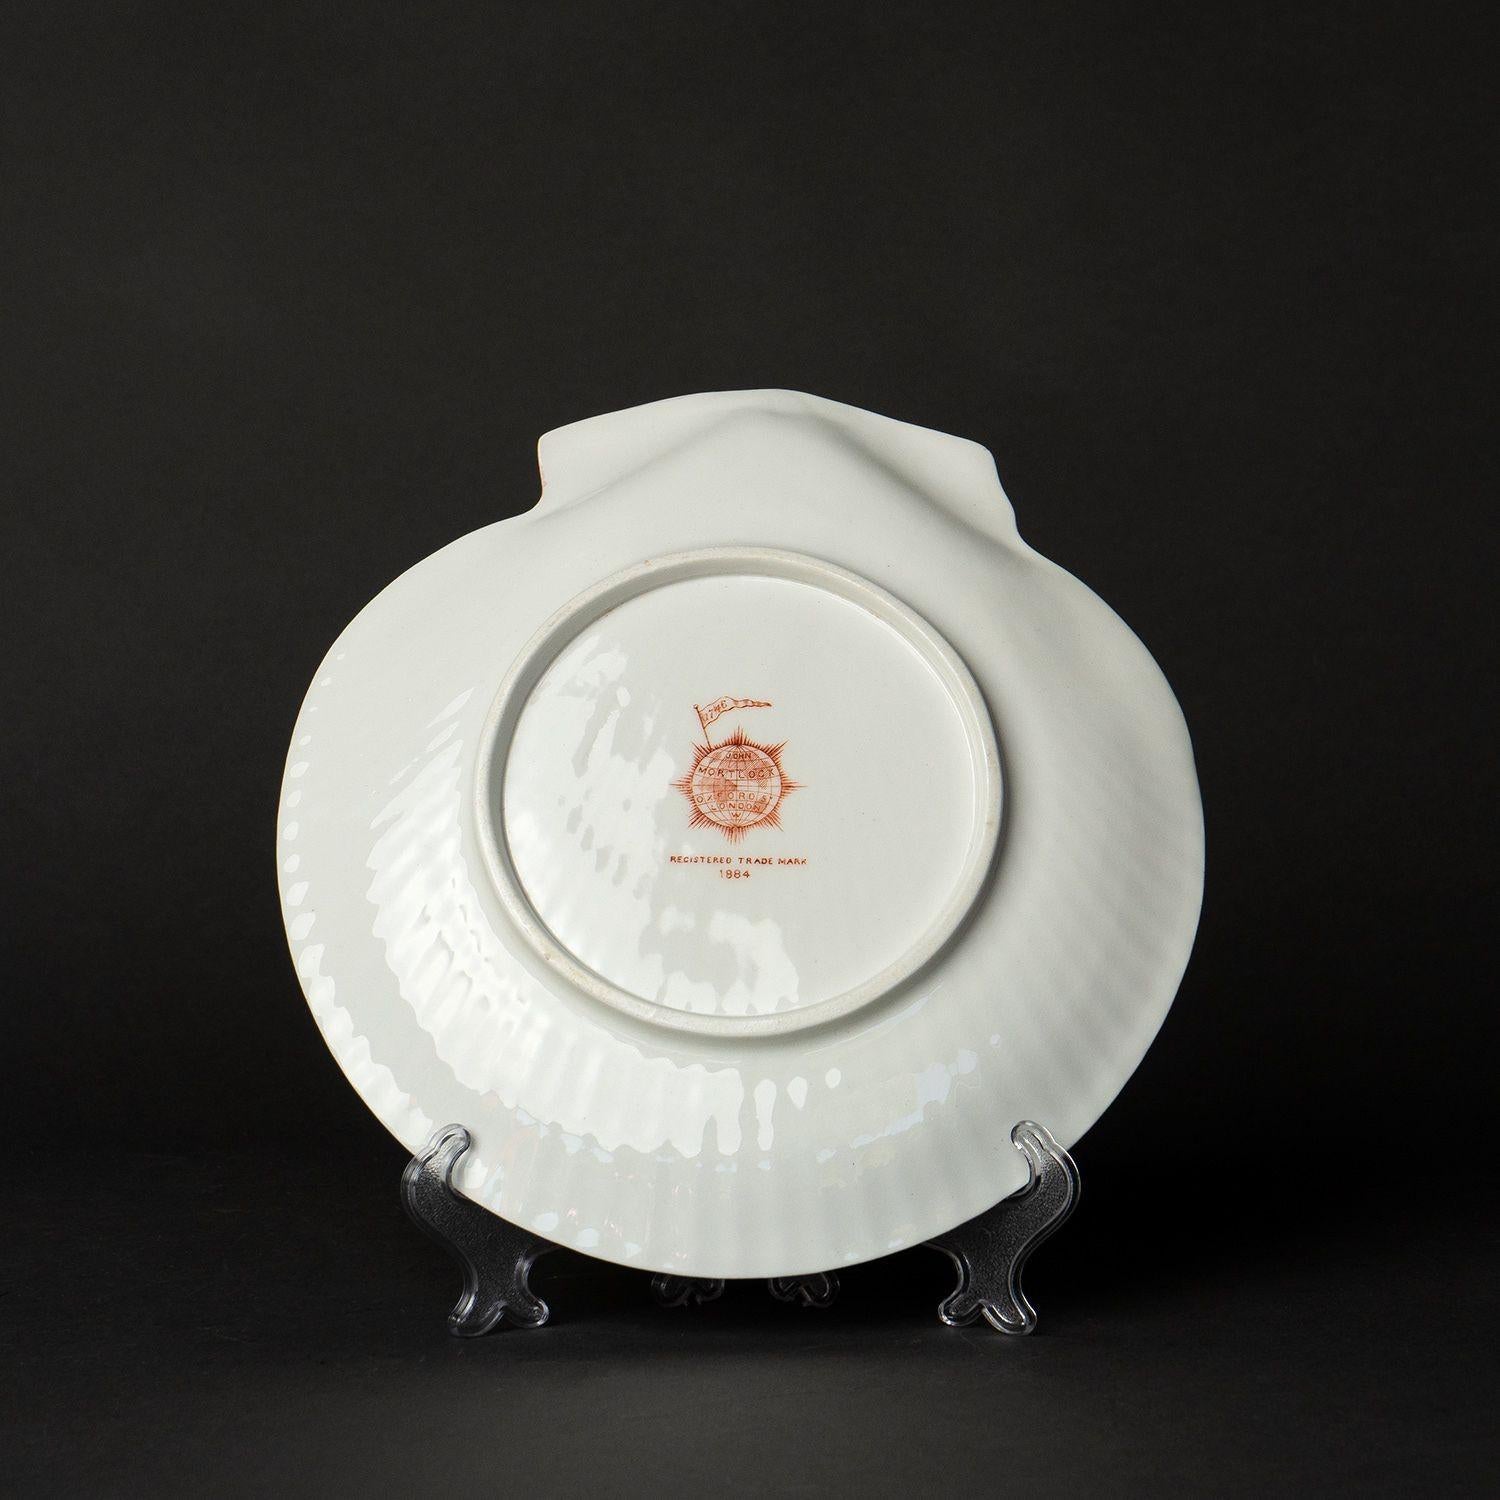 Pink Porcelain 'Nautilus' Dessert Service by Wedgwood for John Mortlock, 1880s For Sale 5